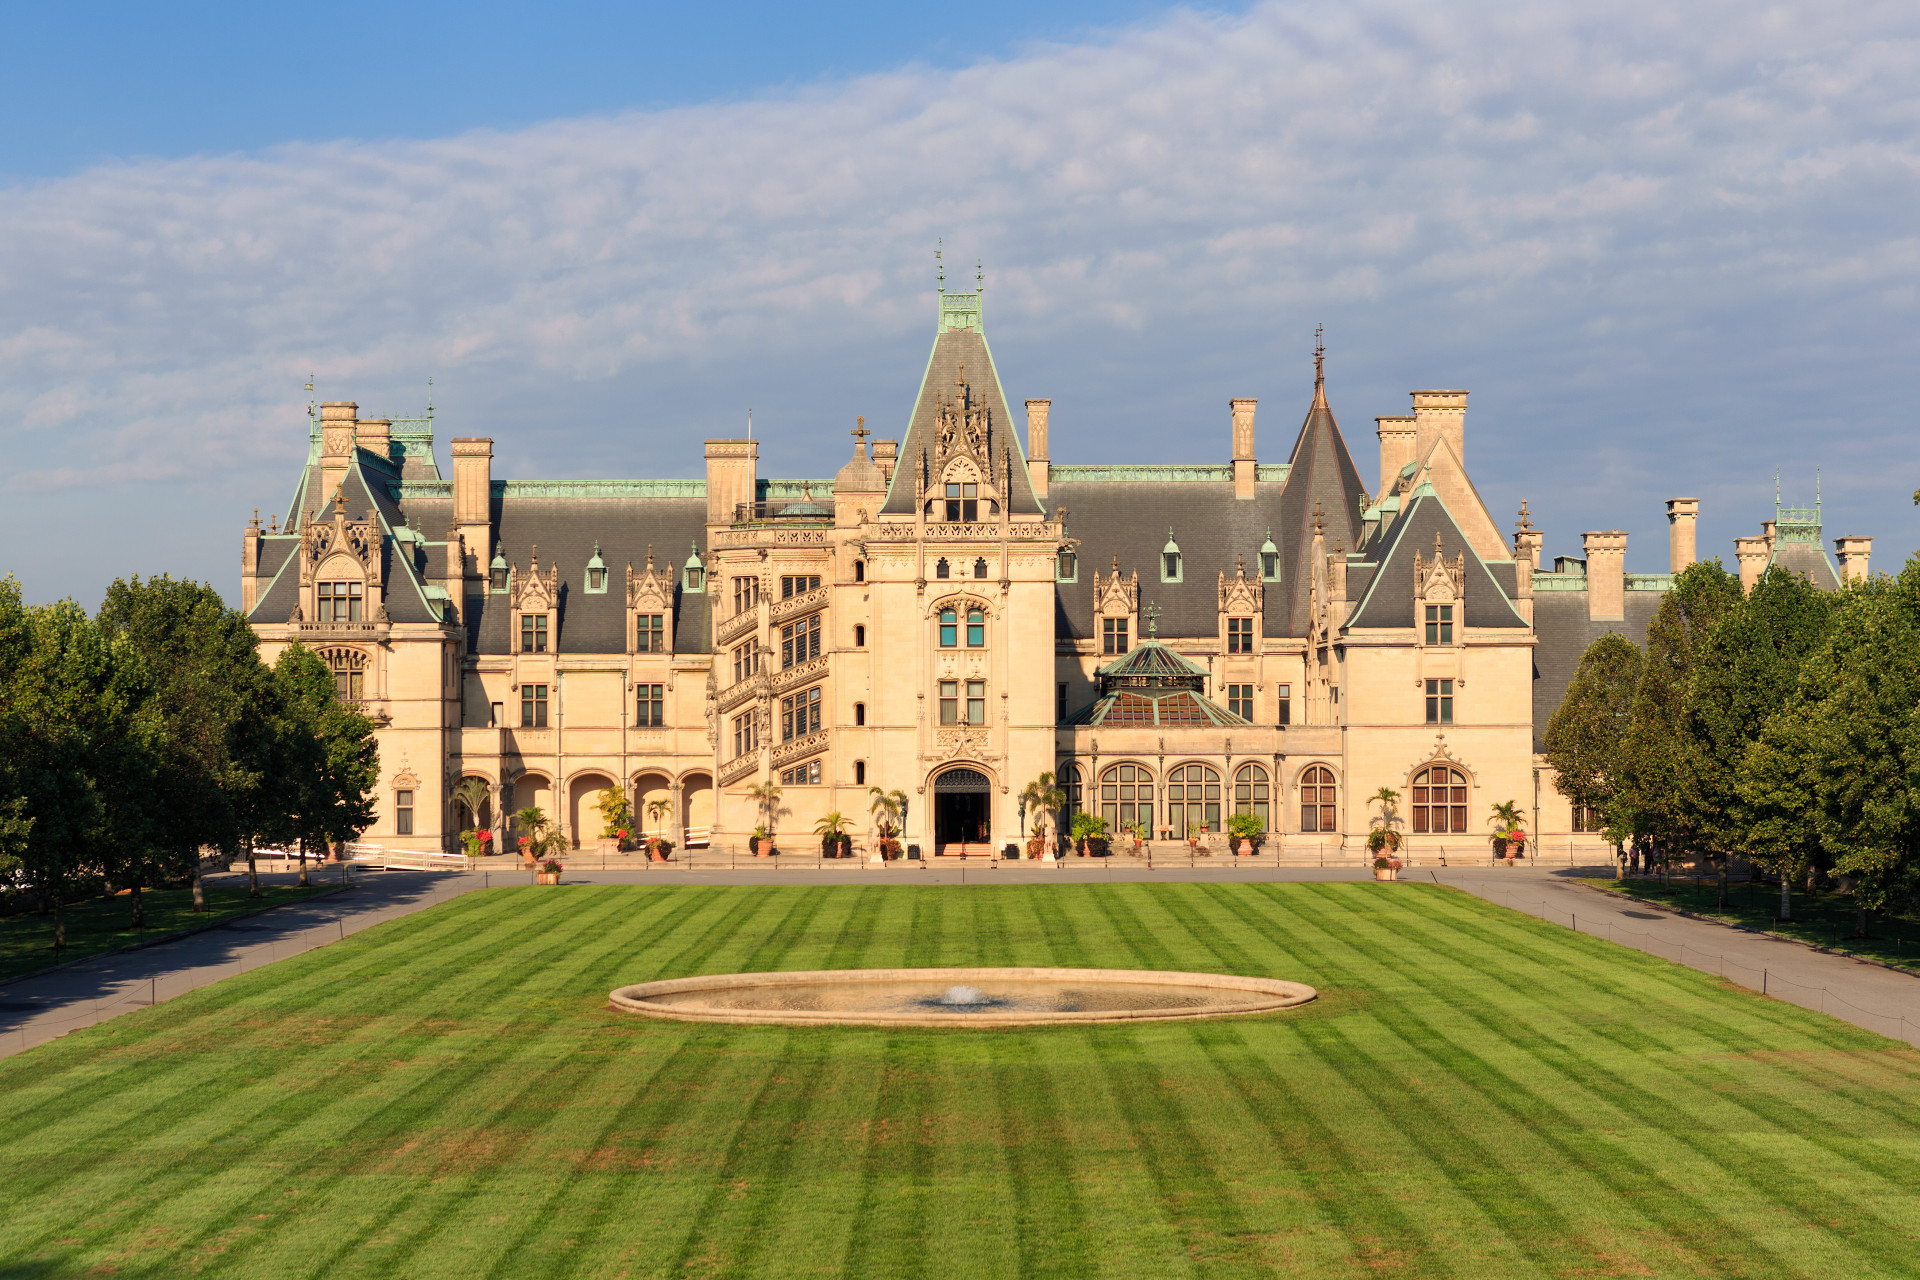 This enormous estate in Asheville, NC, is widely regarded as one of the most impressive examples of classic French architecture in America. At 178,926 sq ft, it is also the largest privately owned home in the country.<p><a href="https://www.msn.com/en-us/community/channel/vid-7xx8mnucu55yw63we9va2gwr7uihbxwc68fxqp25x6tg4ftibpra?cvid=94631541bc0f4f89bfd59158d696ad7e">Follow us and access great exclusive content every day</a></p>